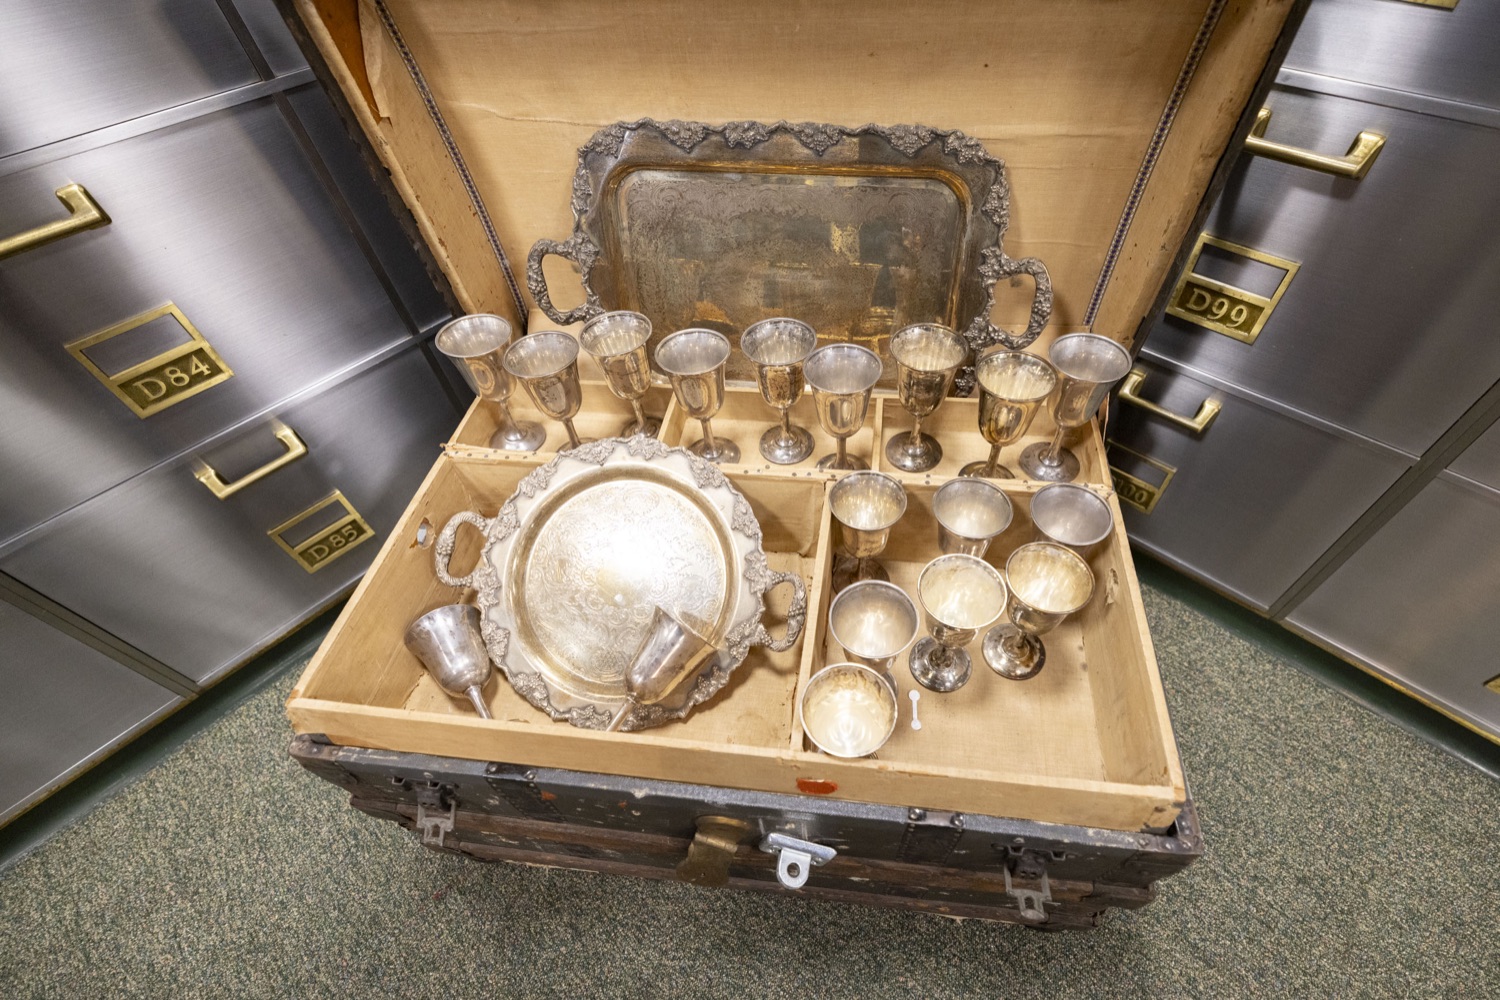 Treasurer Stacy Garrity gives a tour of the historic vault, showing examples of tangible property including military decorations, fine jewelry, antique silver, musical instruments, and other items, in Harrisburg, PA on July 20, 2023.<br><a href="https://filesource.amperwave.net/commonwealthofpa/photo/23247_treas_vault_cz_16.jpg" target="_blank">⇣ Download Photo</a>